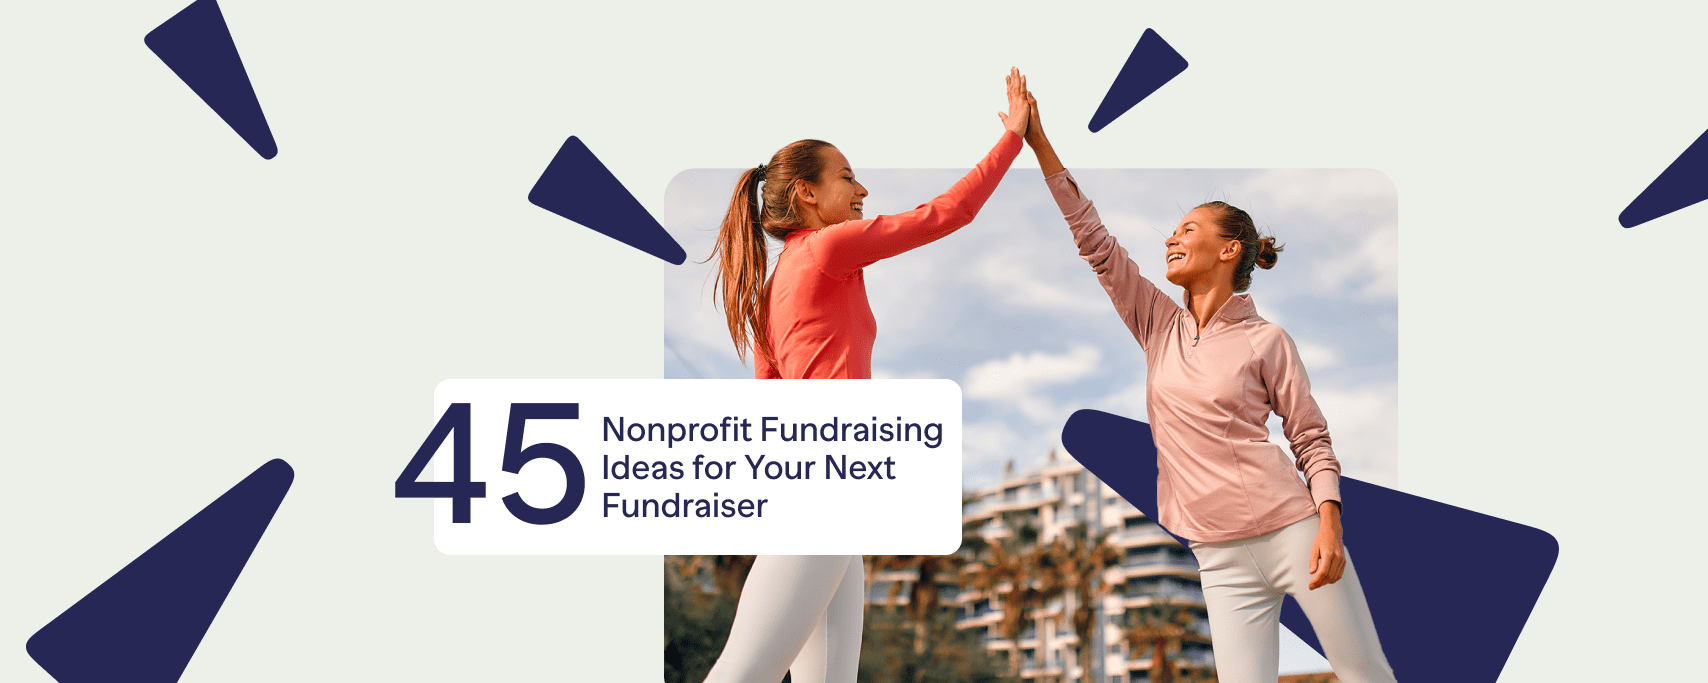 45 Nonprofit Fundraising Ideas for Your Next Fundraiser - RallyUp